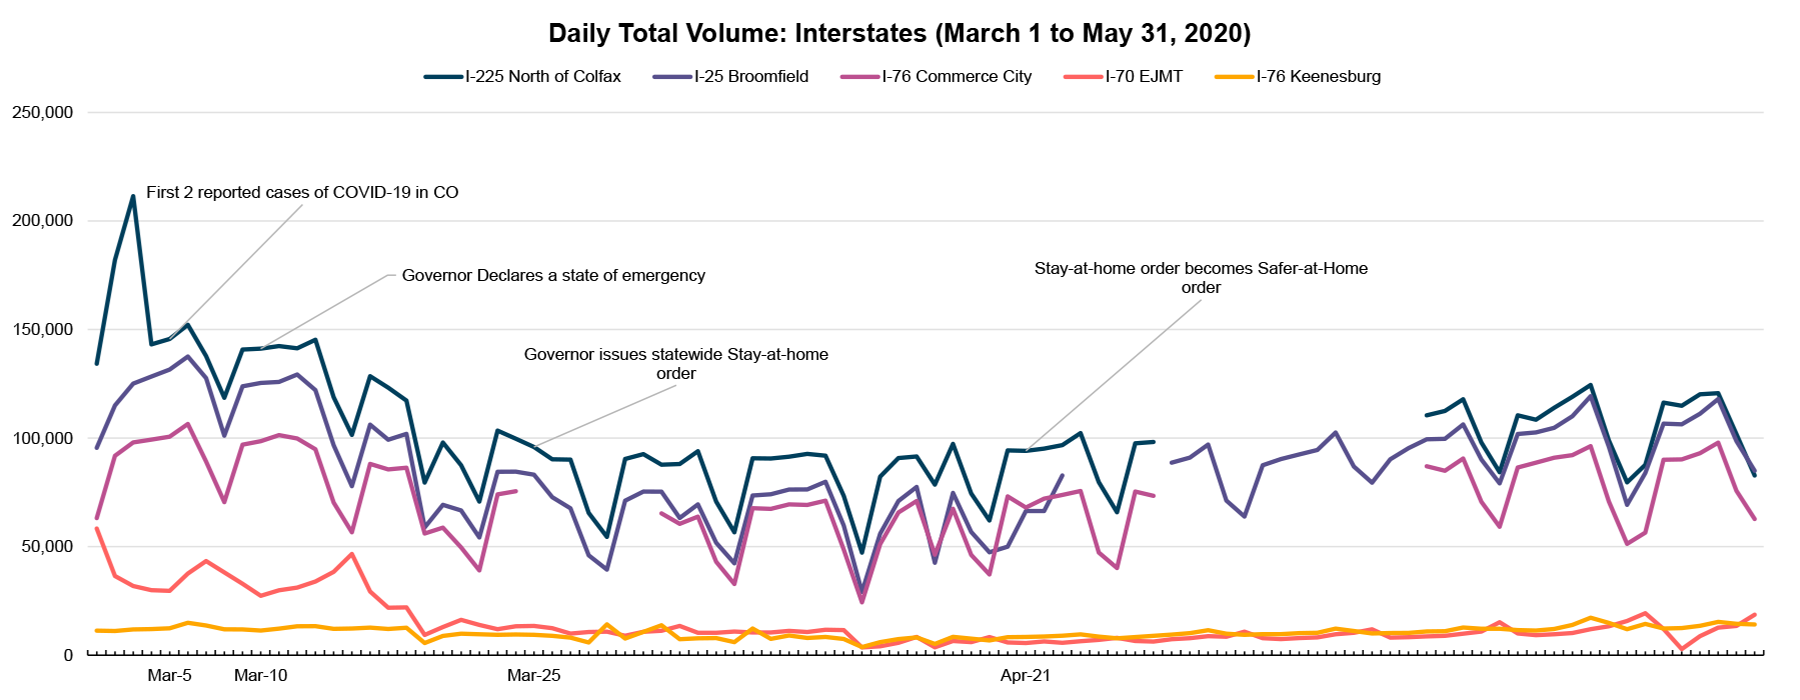 Colorado Interstates Daily Total Traffic Volumes March 1 through May 31, 2020